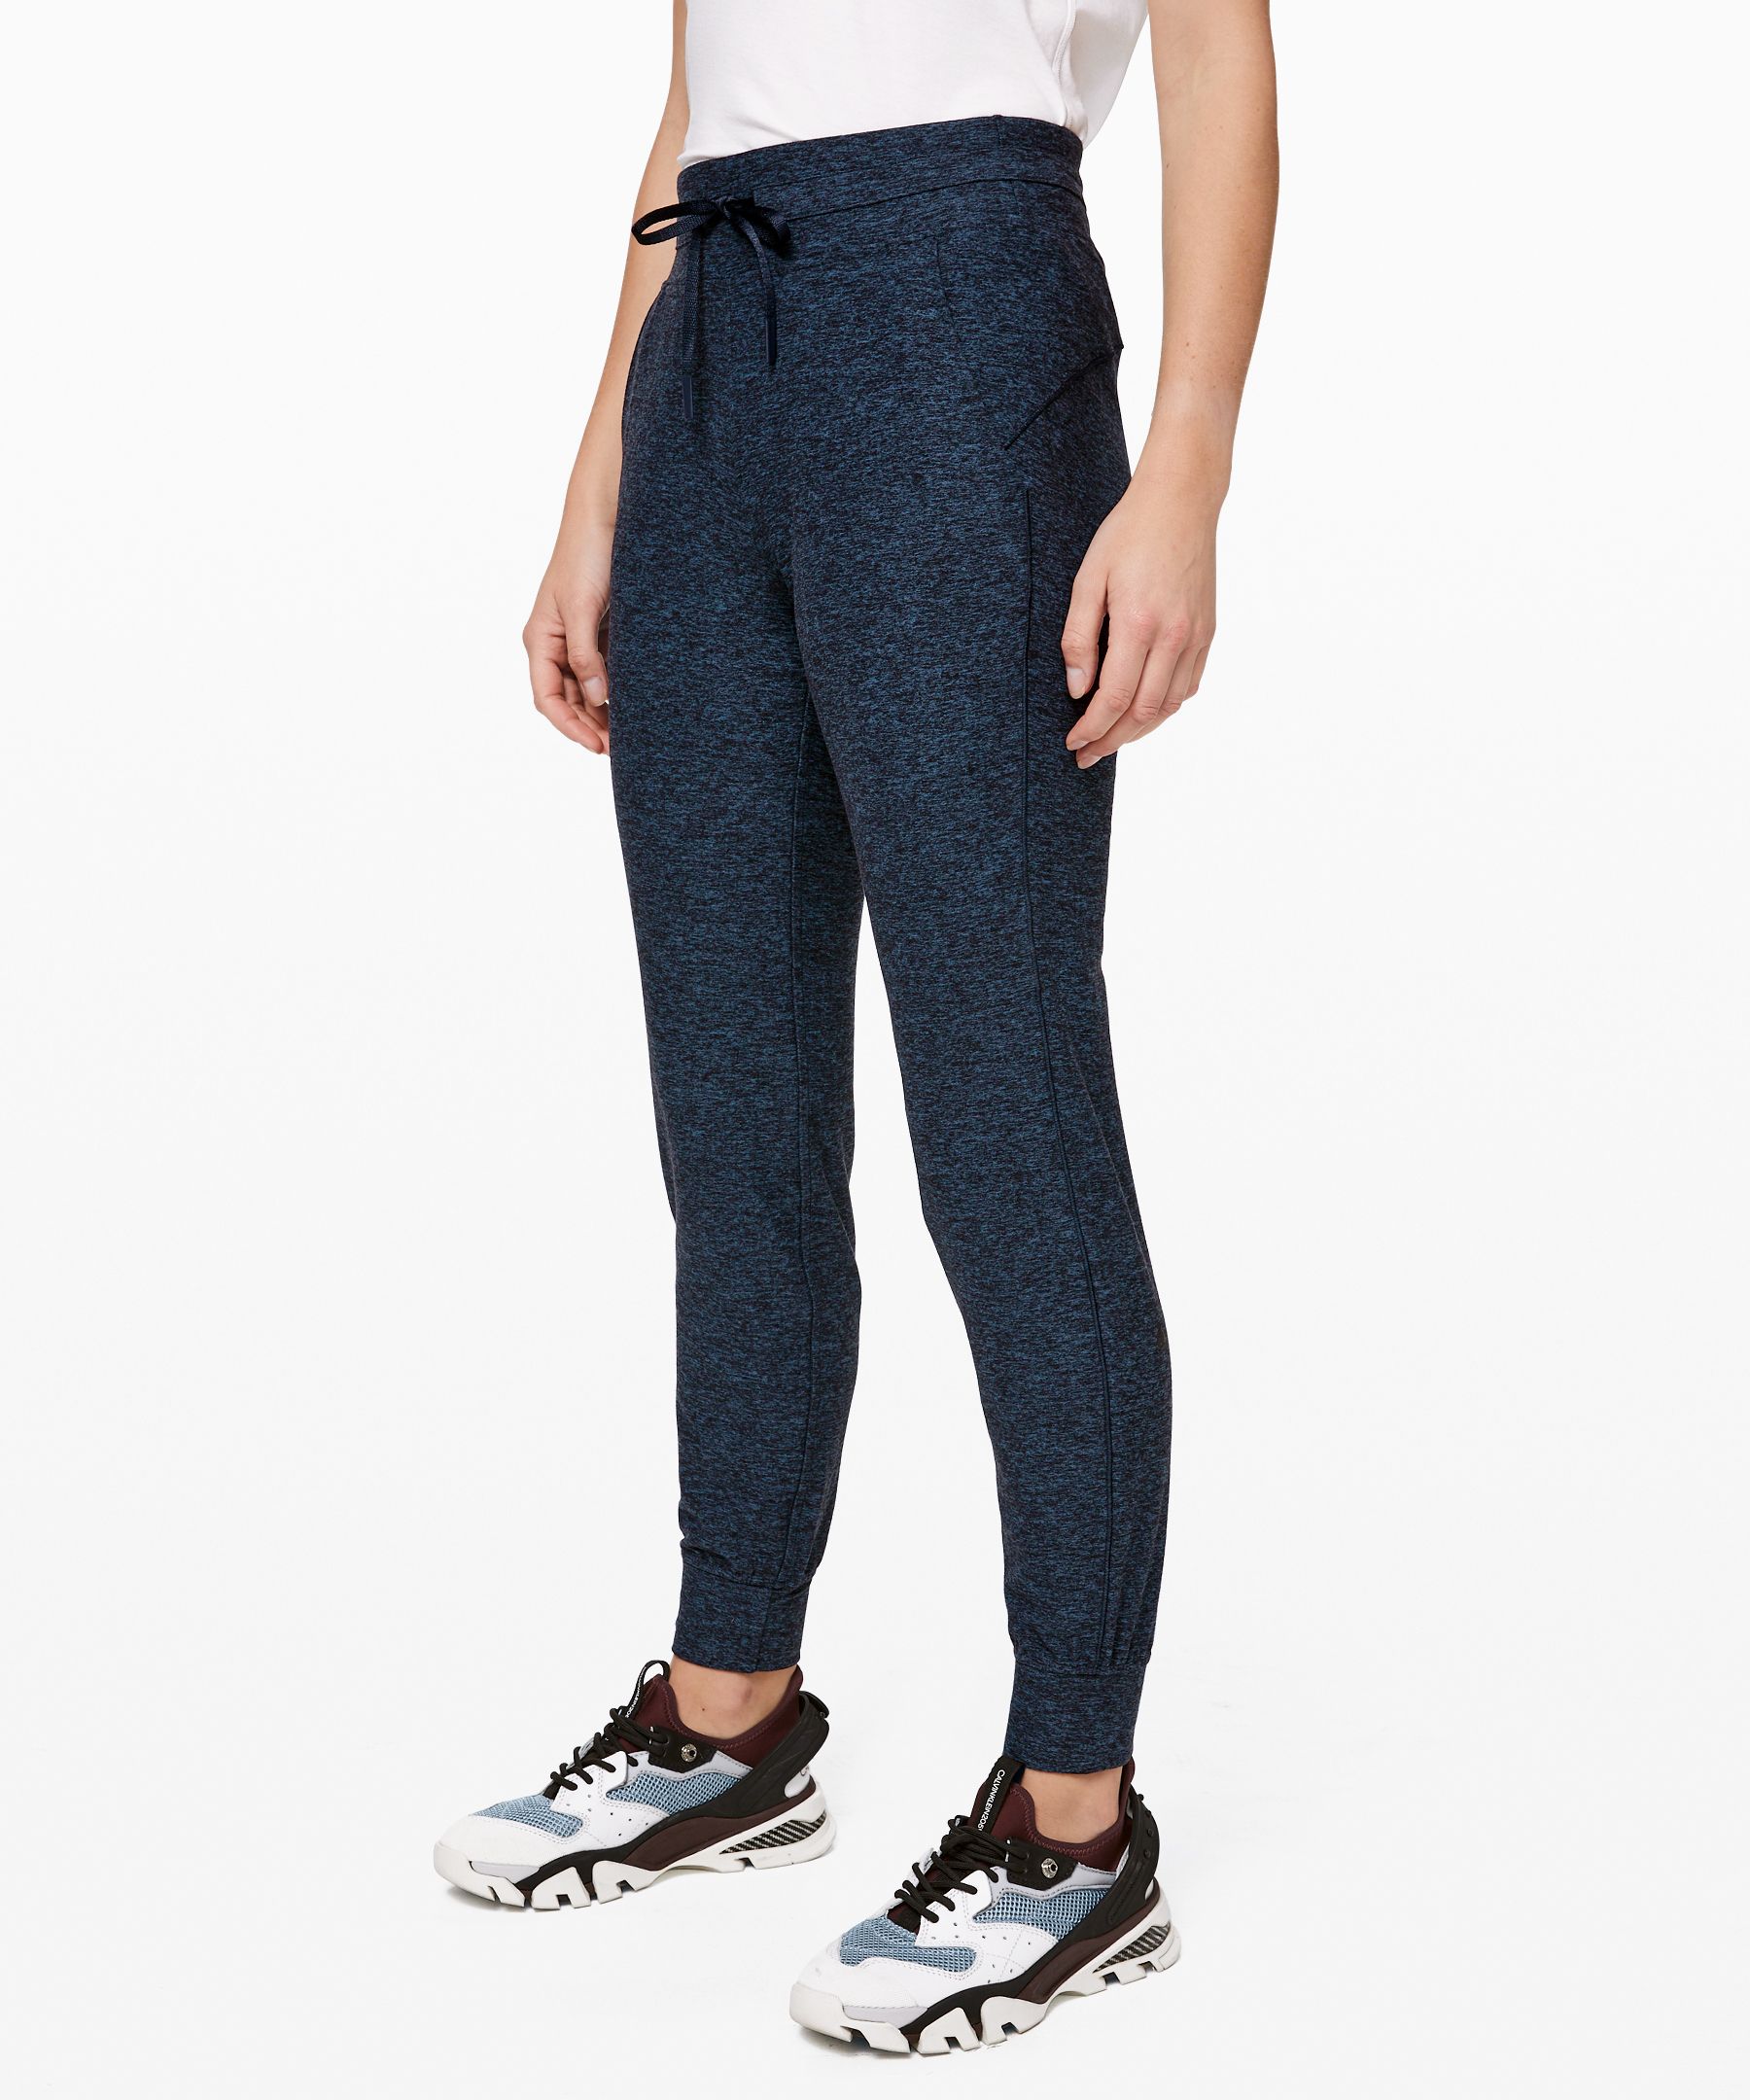 Are Fabletics Leggings Breathable